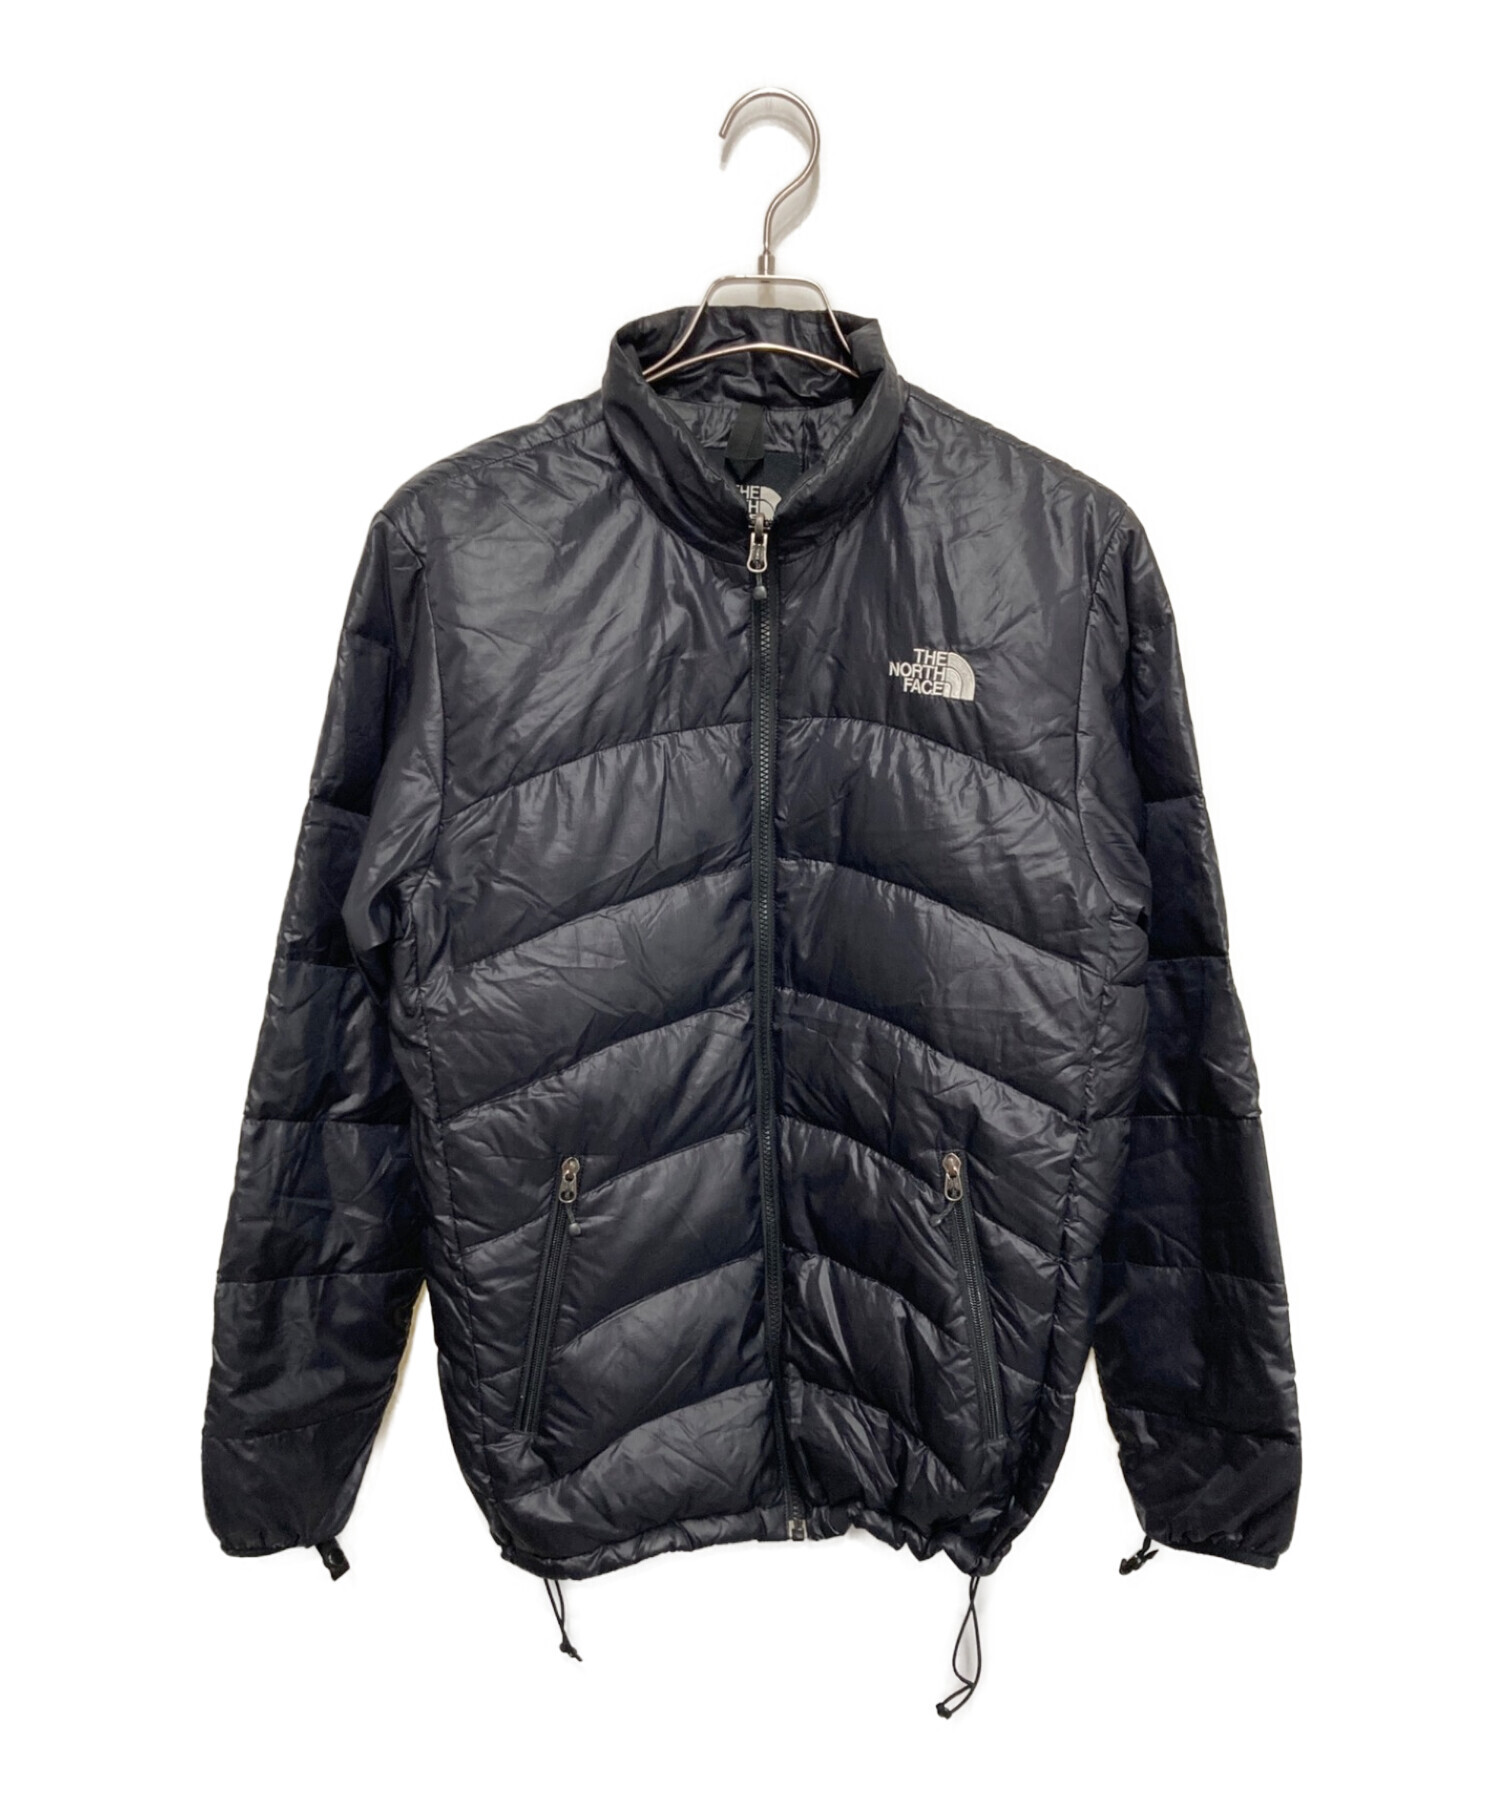 THE NORTH FACE◇ZEUS TRICLIMATE JACKET_ゼウスクライメイト